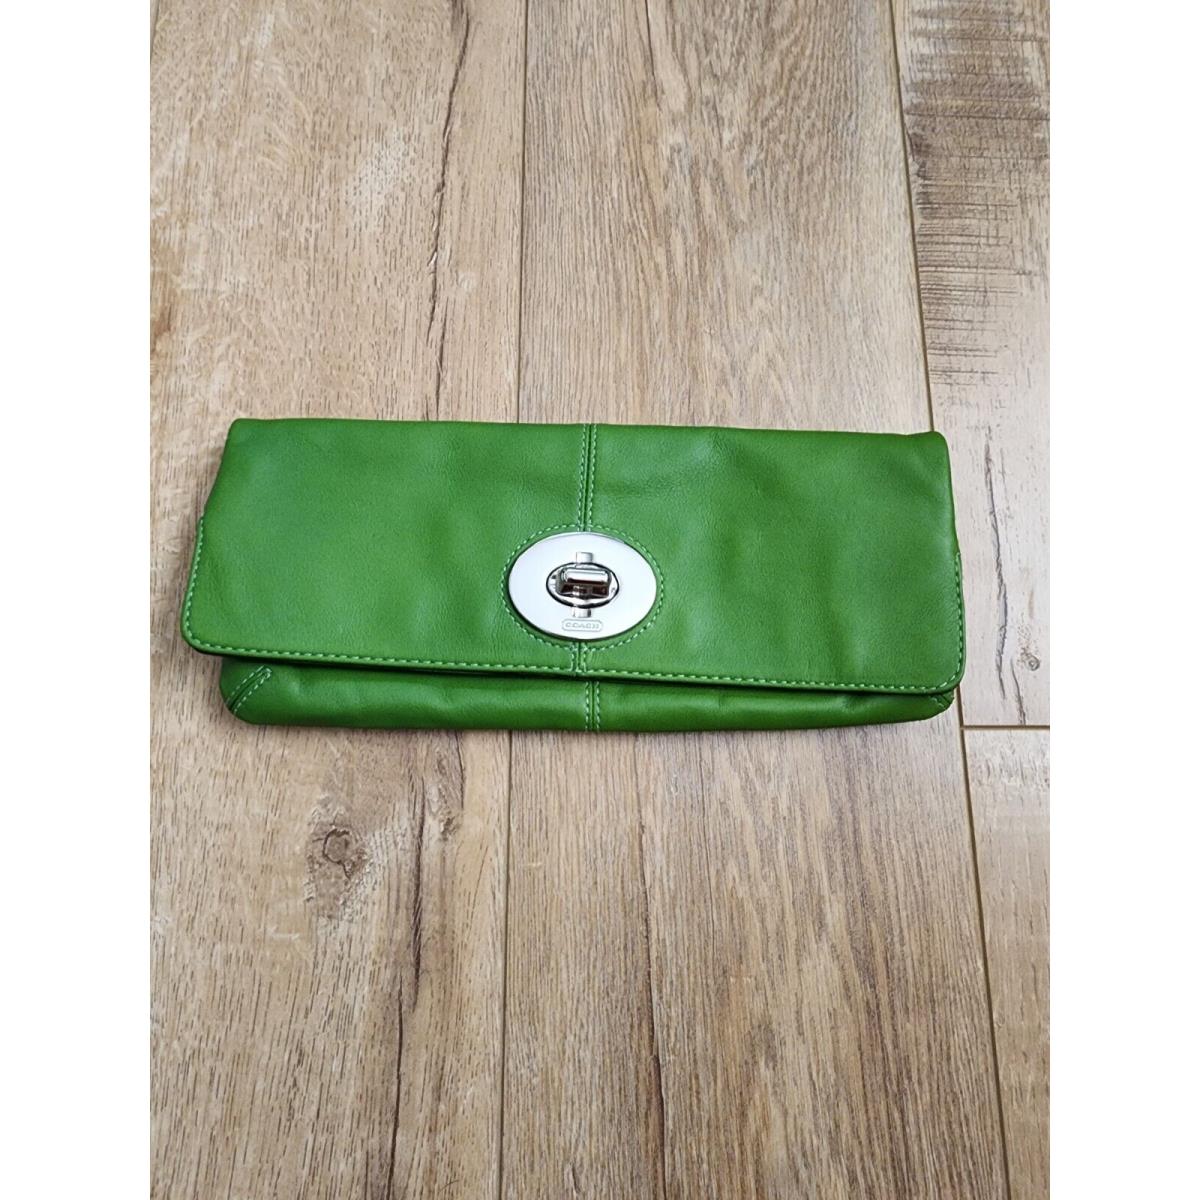 Coach Green Smooth Leather Turnlock Bifold Long Evening Clutch Pouch